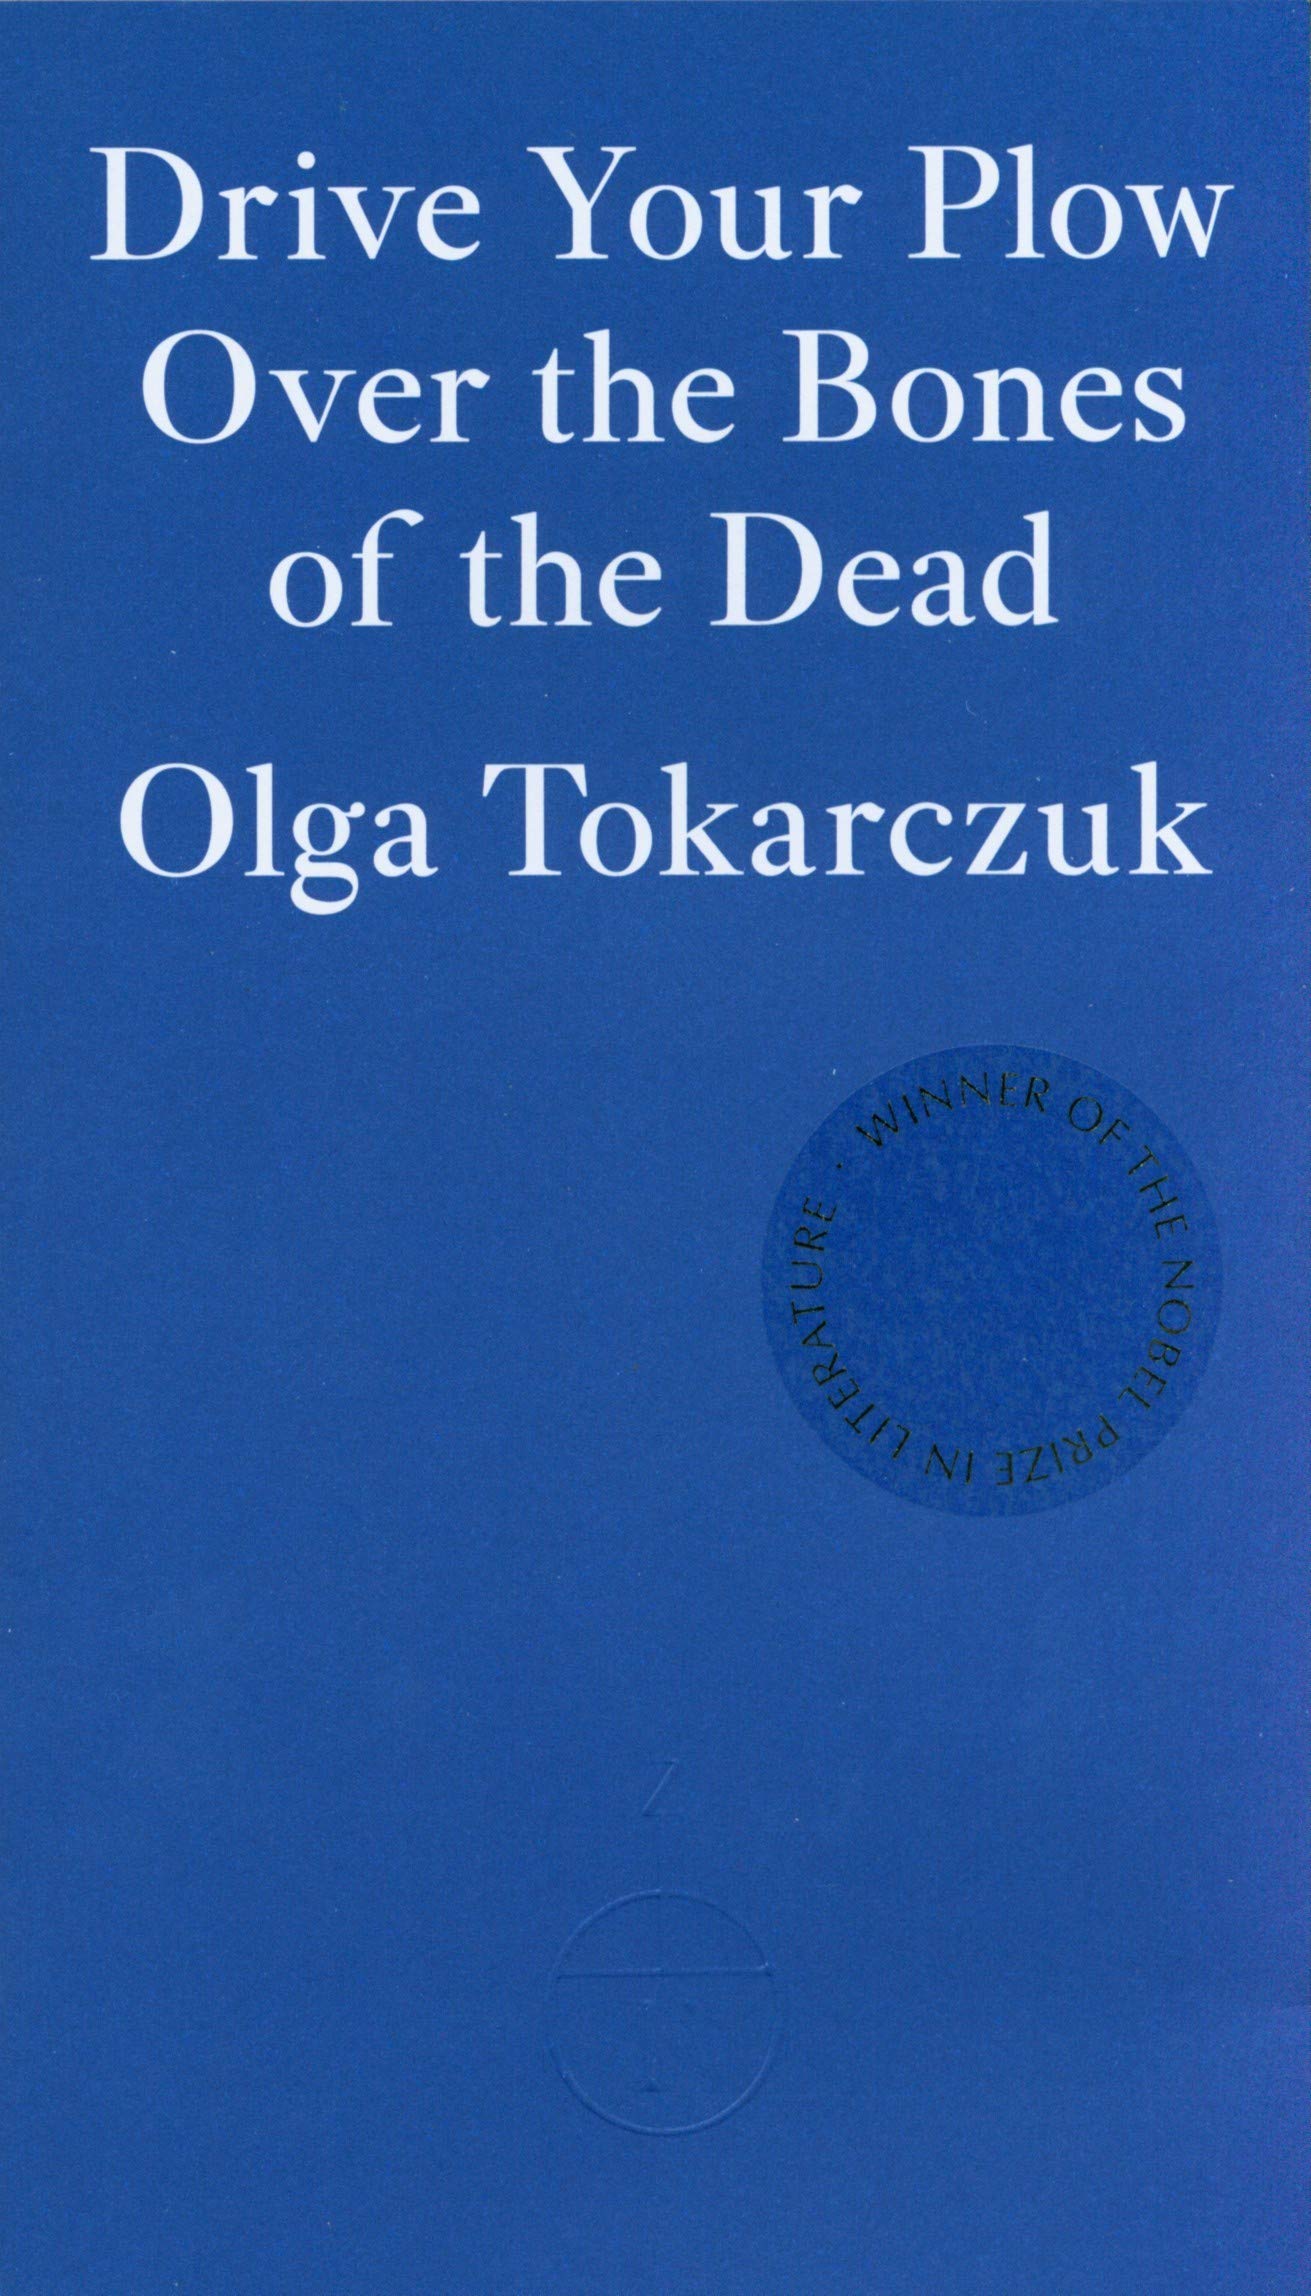 [EPUB] Drive Your Plow Over the Bones of the Dead by Olga Tokarczuk